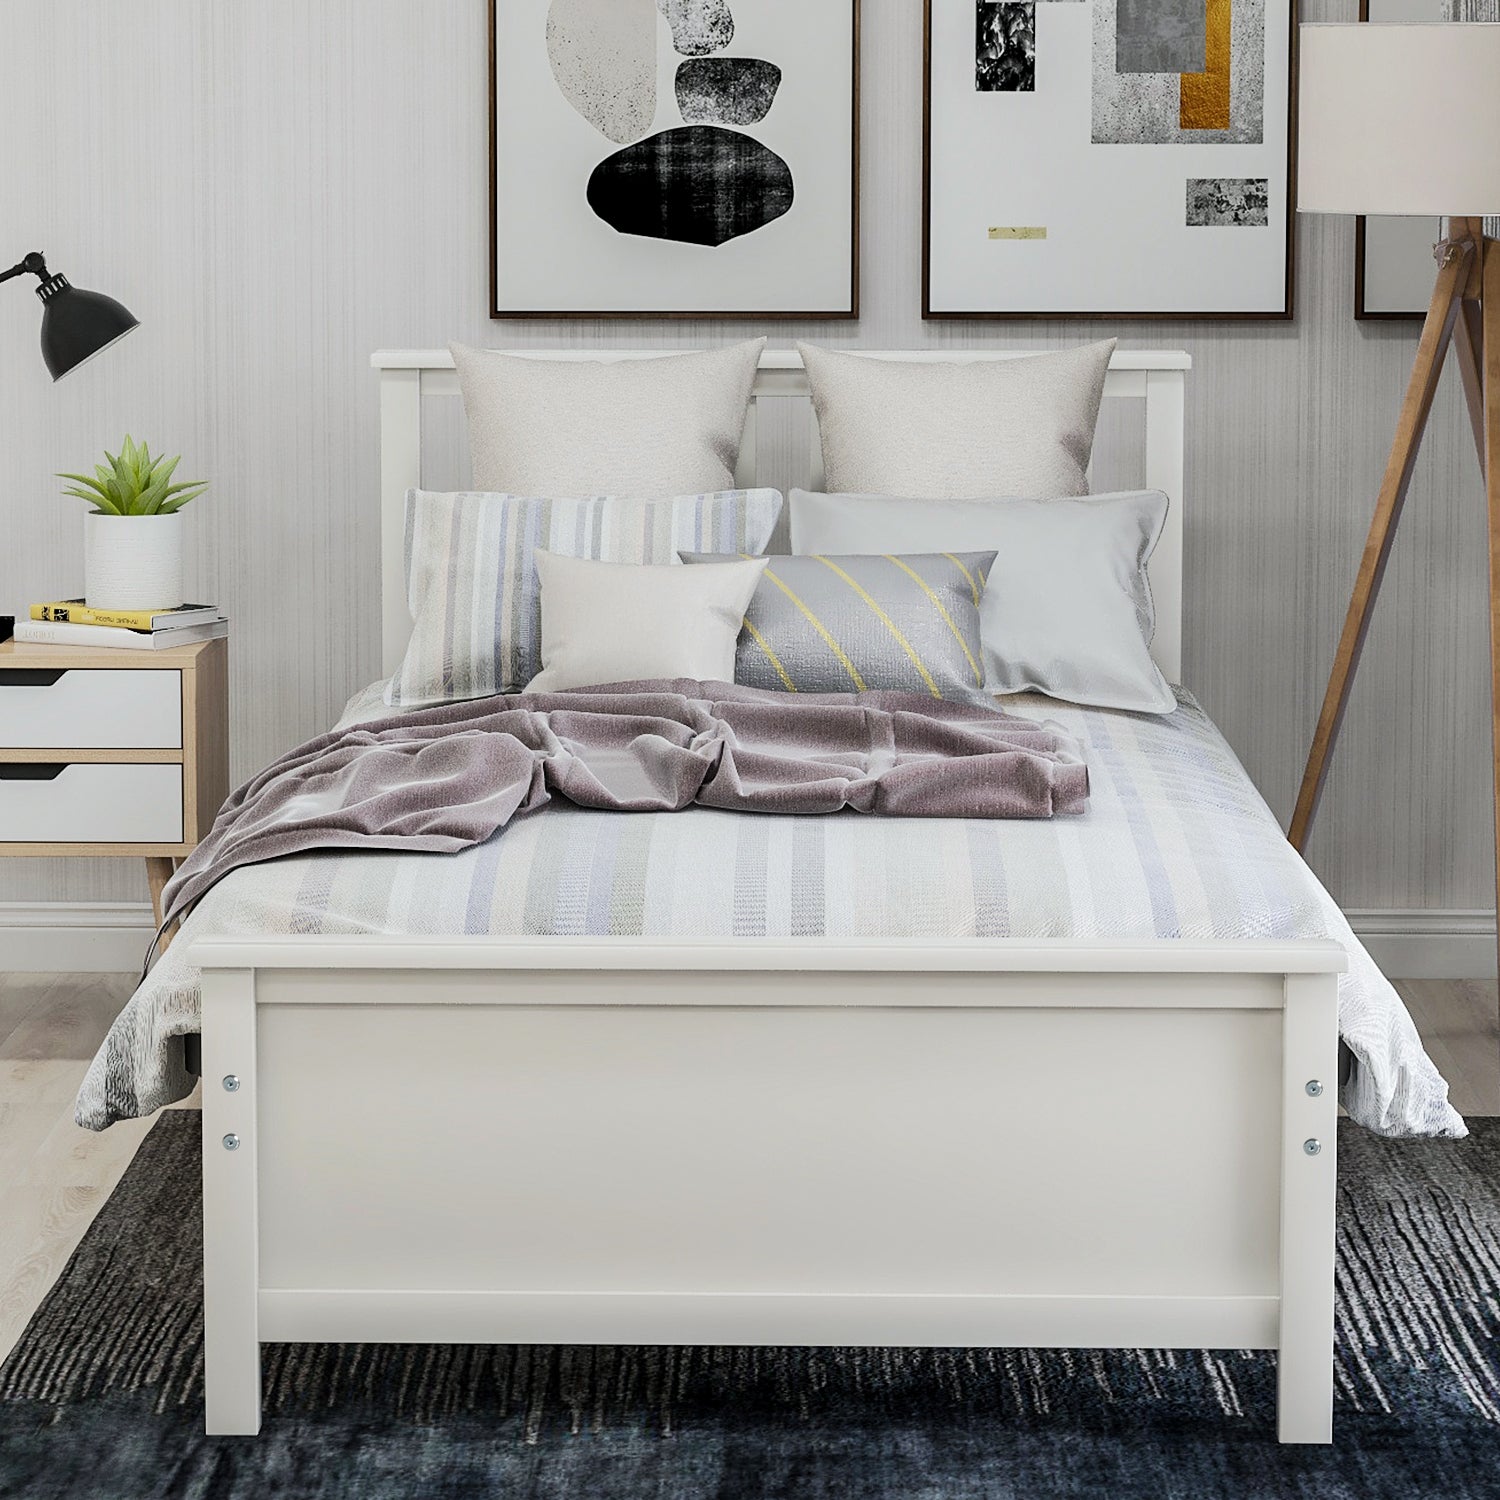 Wood PlatformTwin Bed White